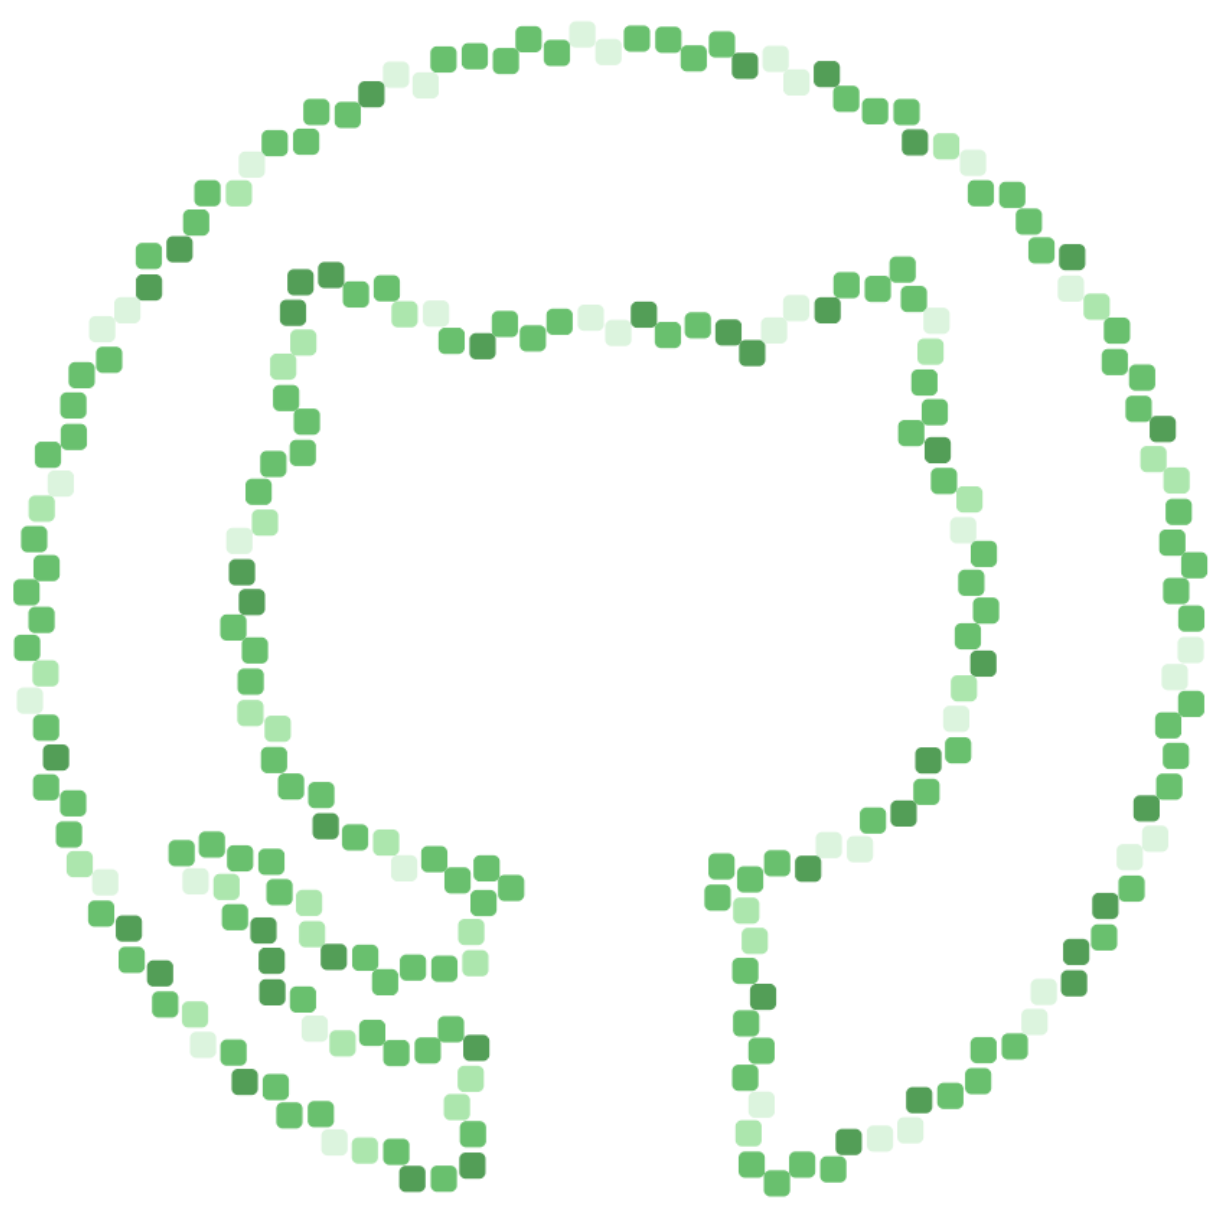 An Octocat drawn out of hundreds of small green commit graph squares.